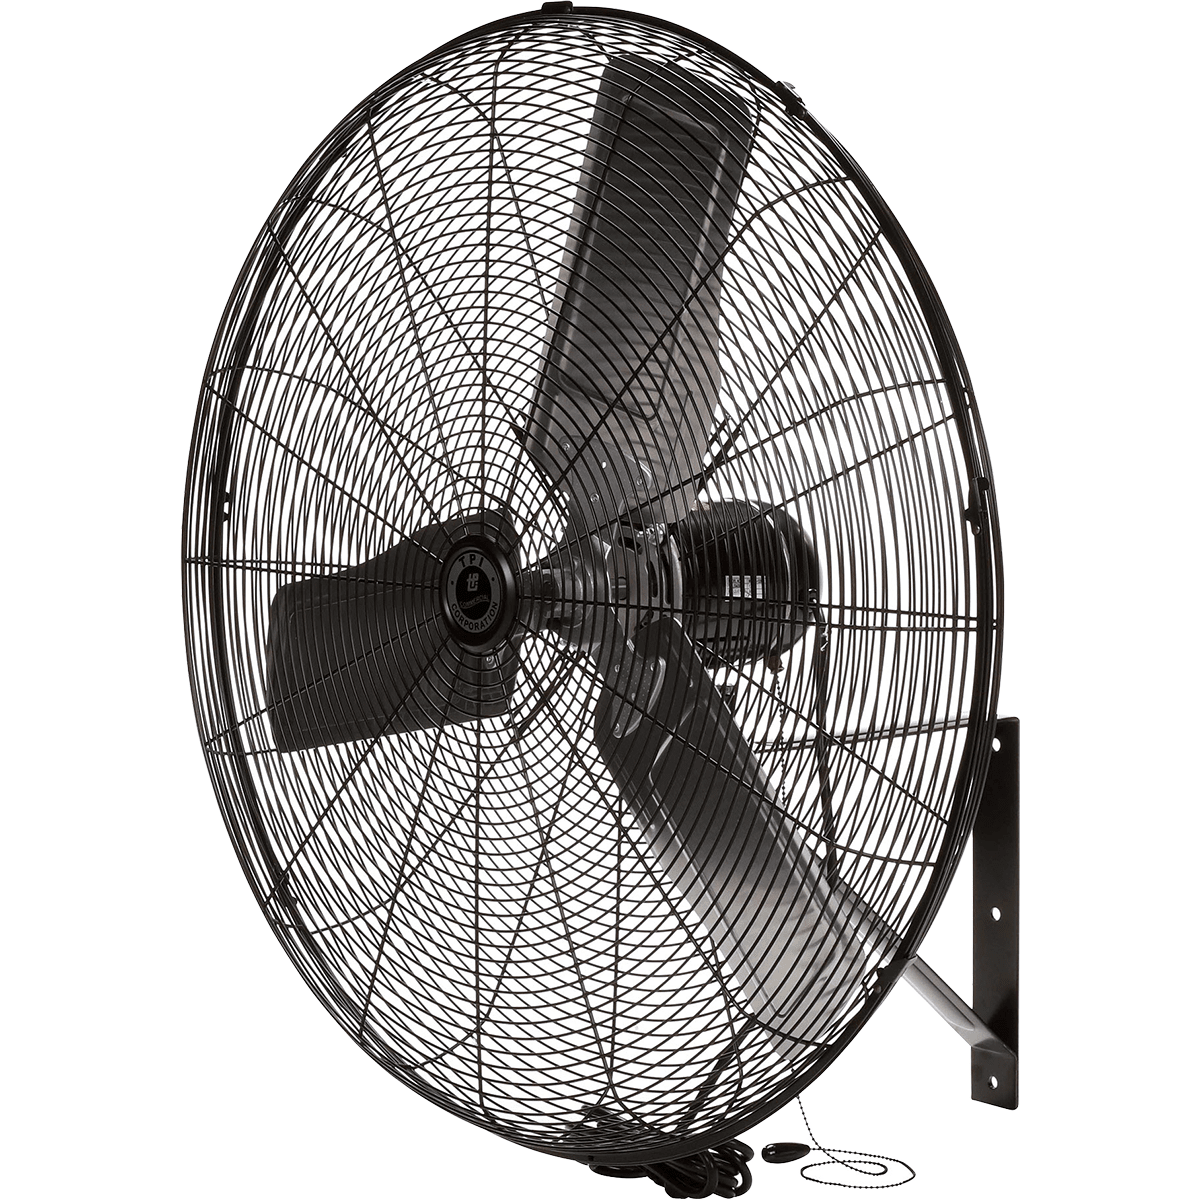 TPI CACU 3-Speed 1/4 HP Fixed Commercial Fan - 30-in. Wall Mount